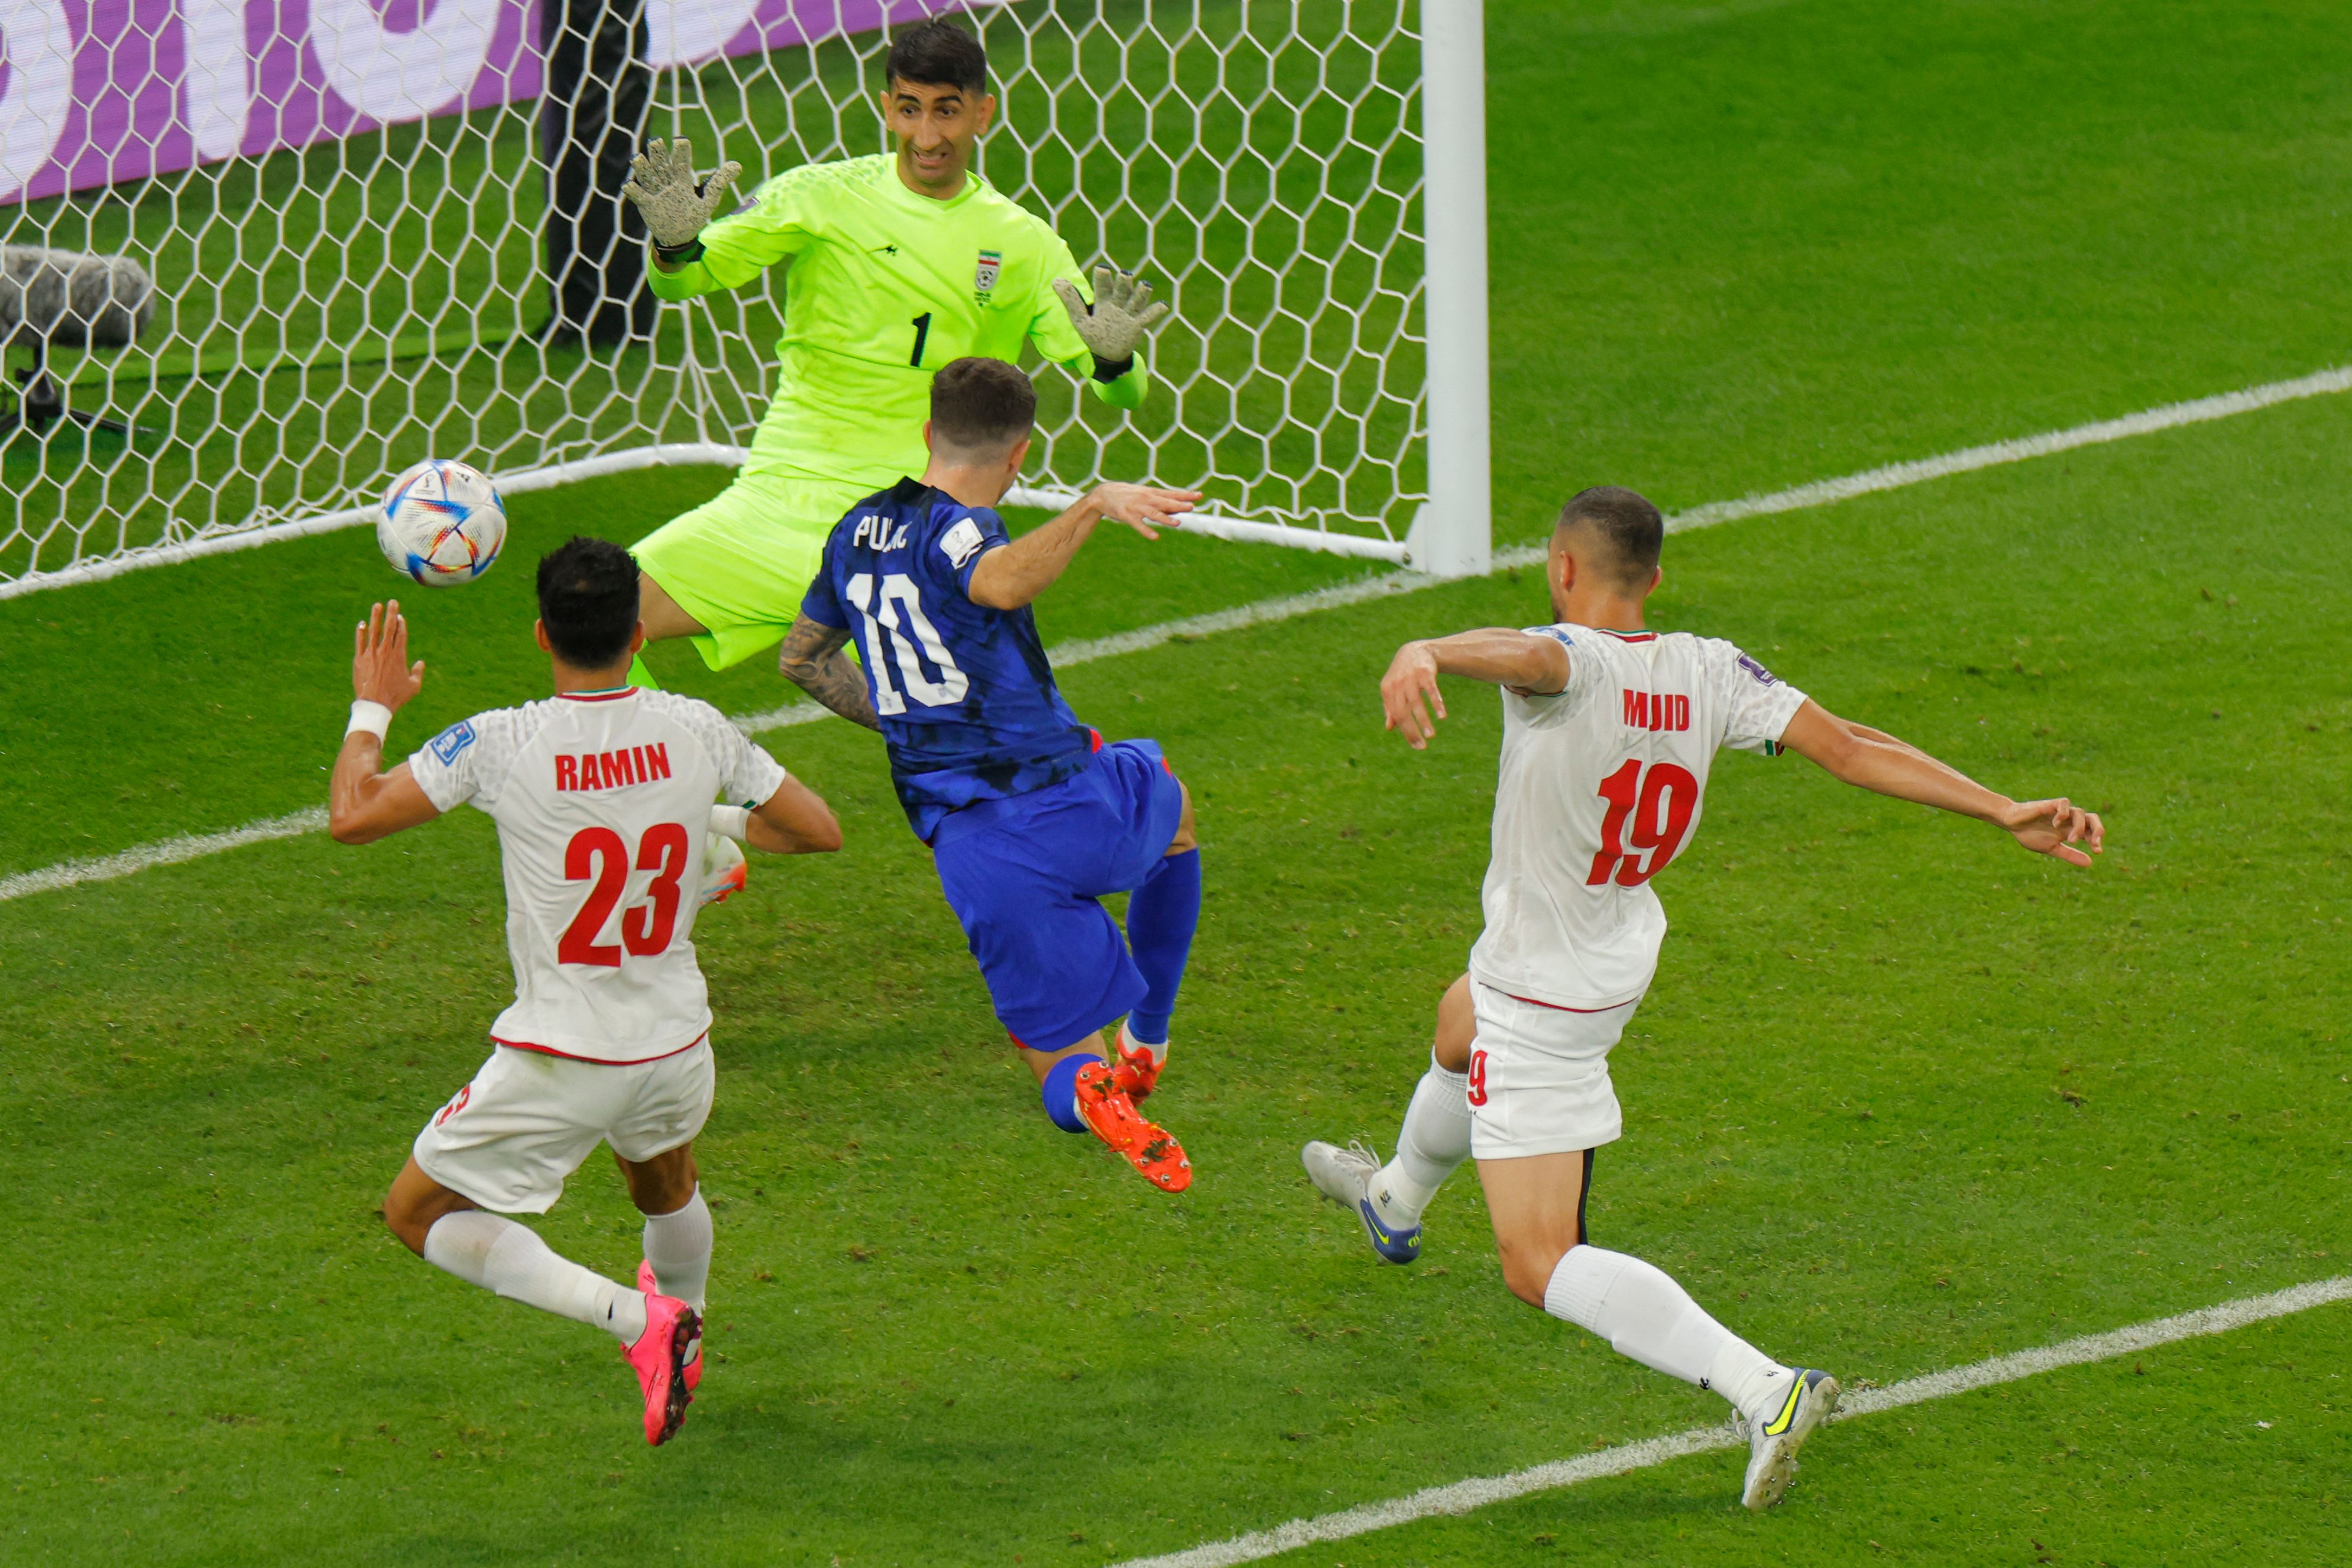 2022 World Cup: USA 1-0 Iran - The Americans hold on for a win and